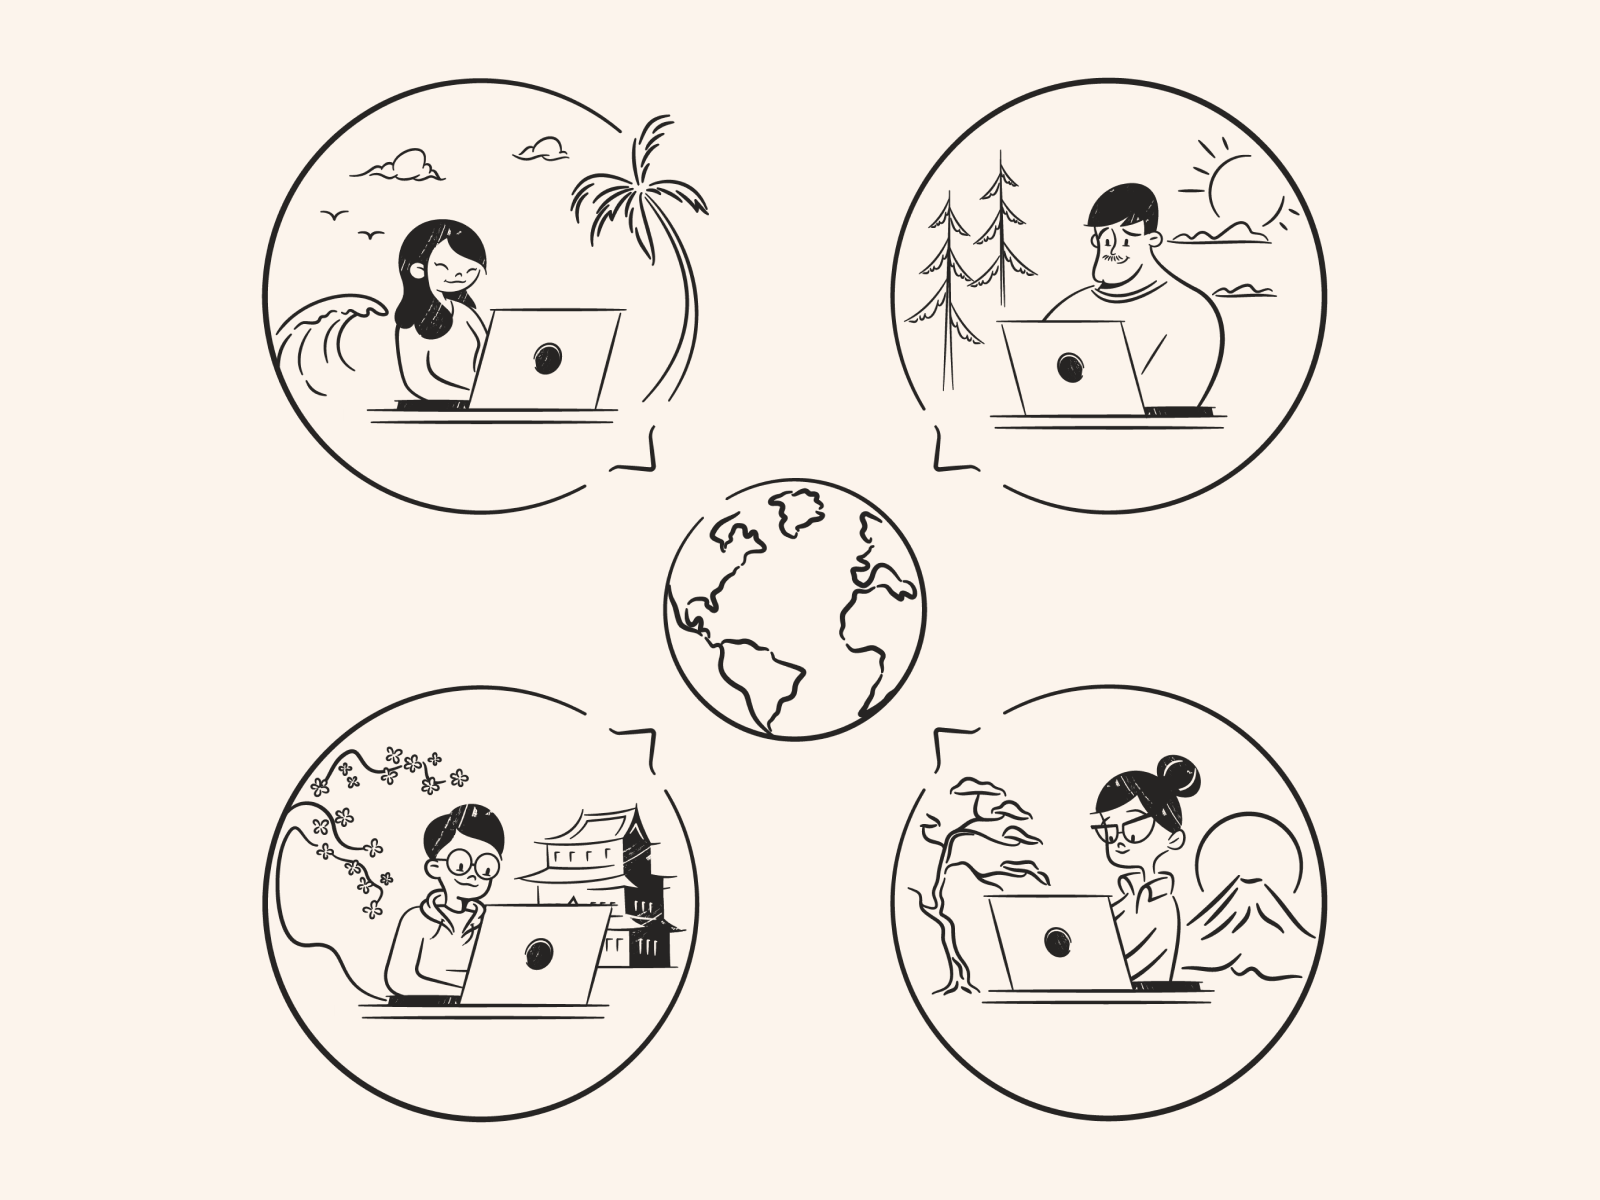 Illustrations of people working remotely in different environments.